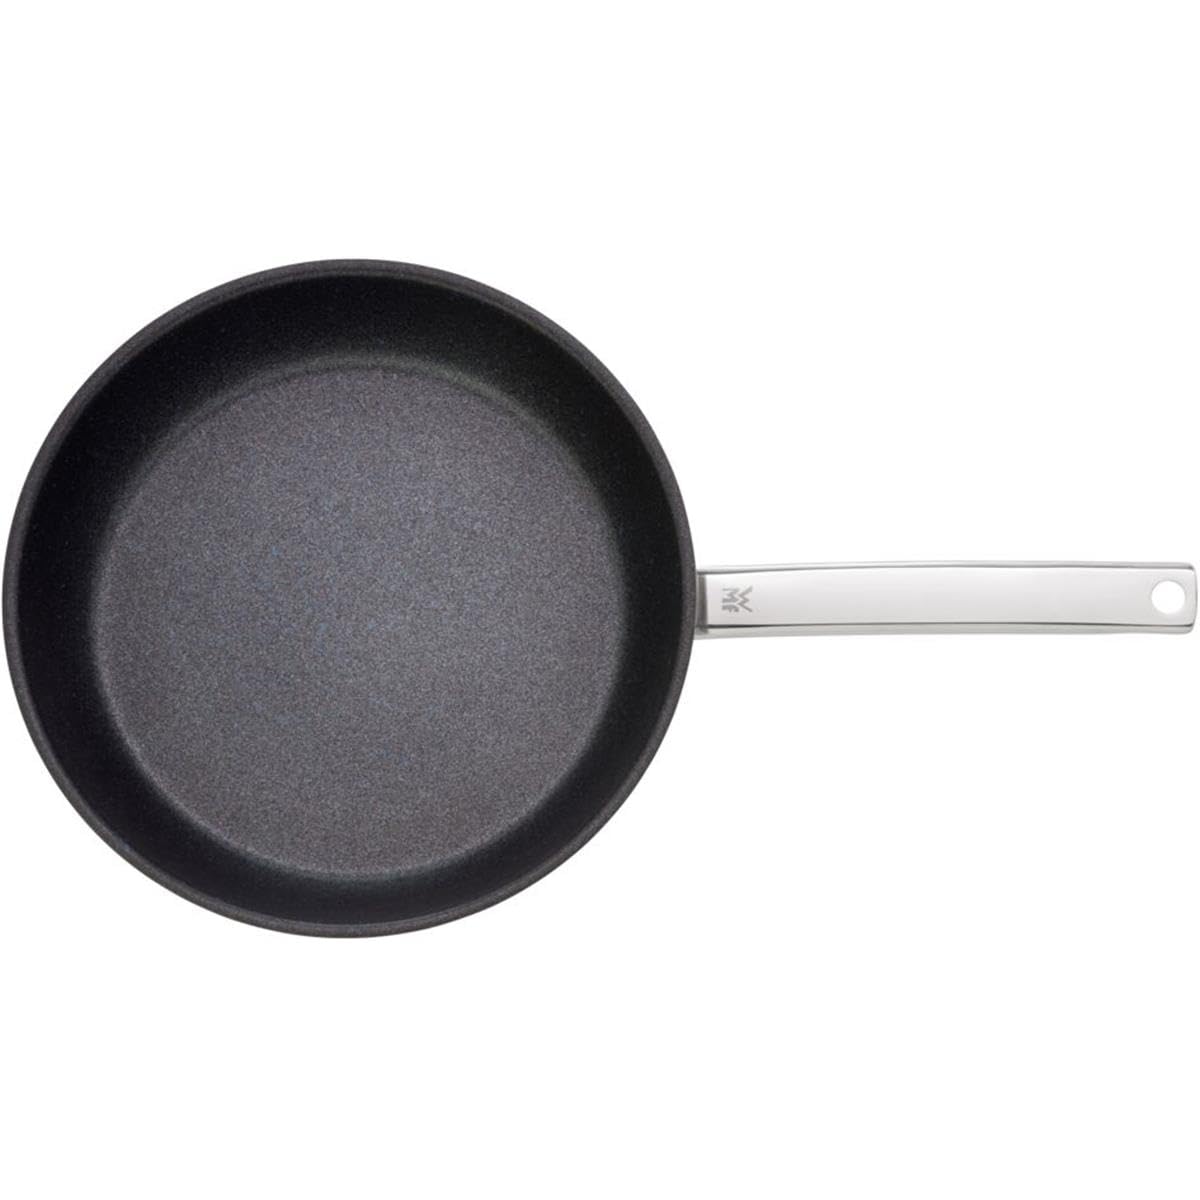 WMF W0775284021 Frying Pan, 11.0 inches (28 cm), Palmadur Advanced IH Compatible with Gas Stoves